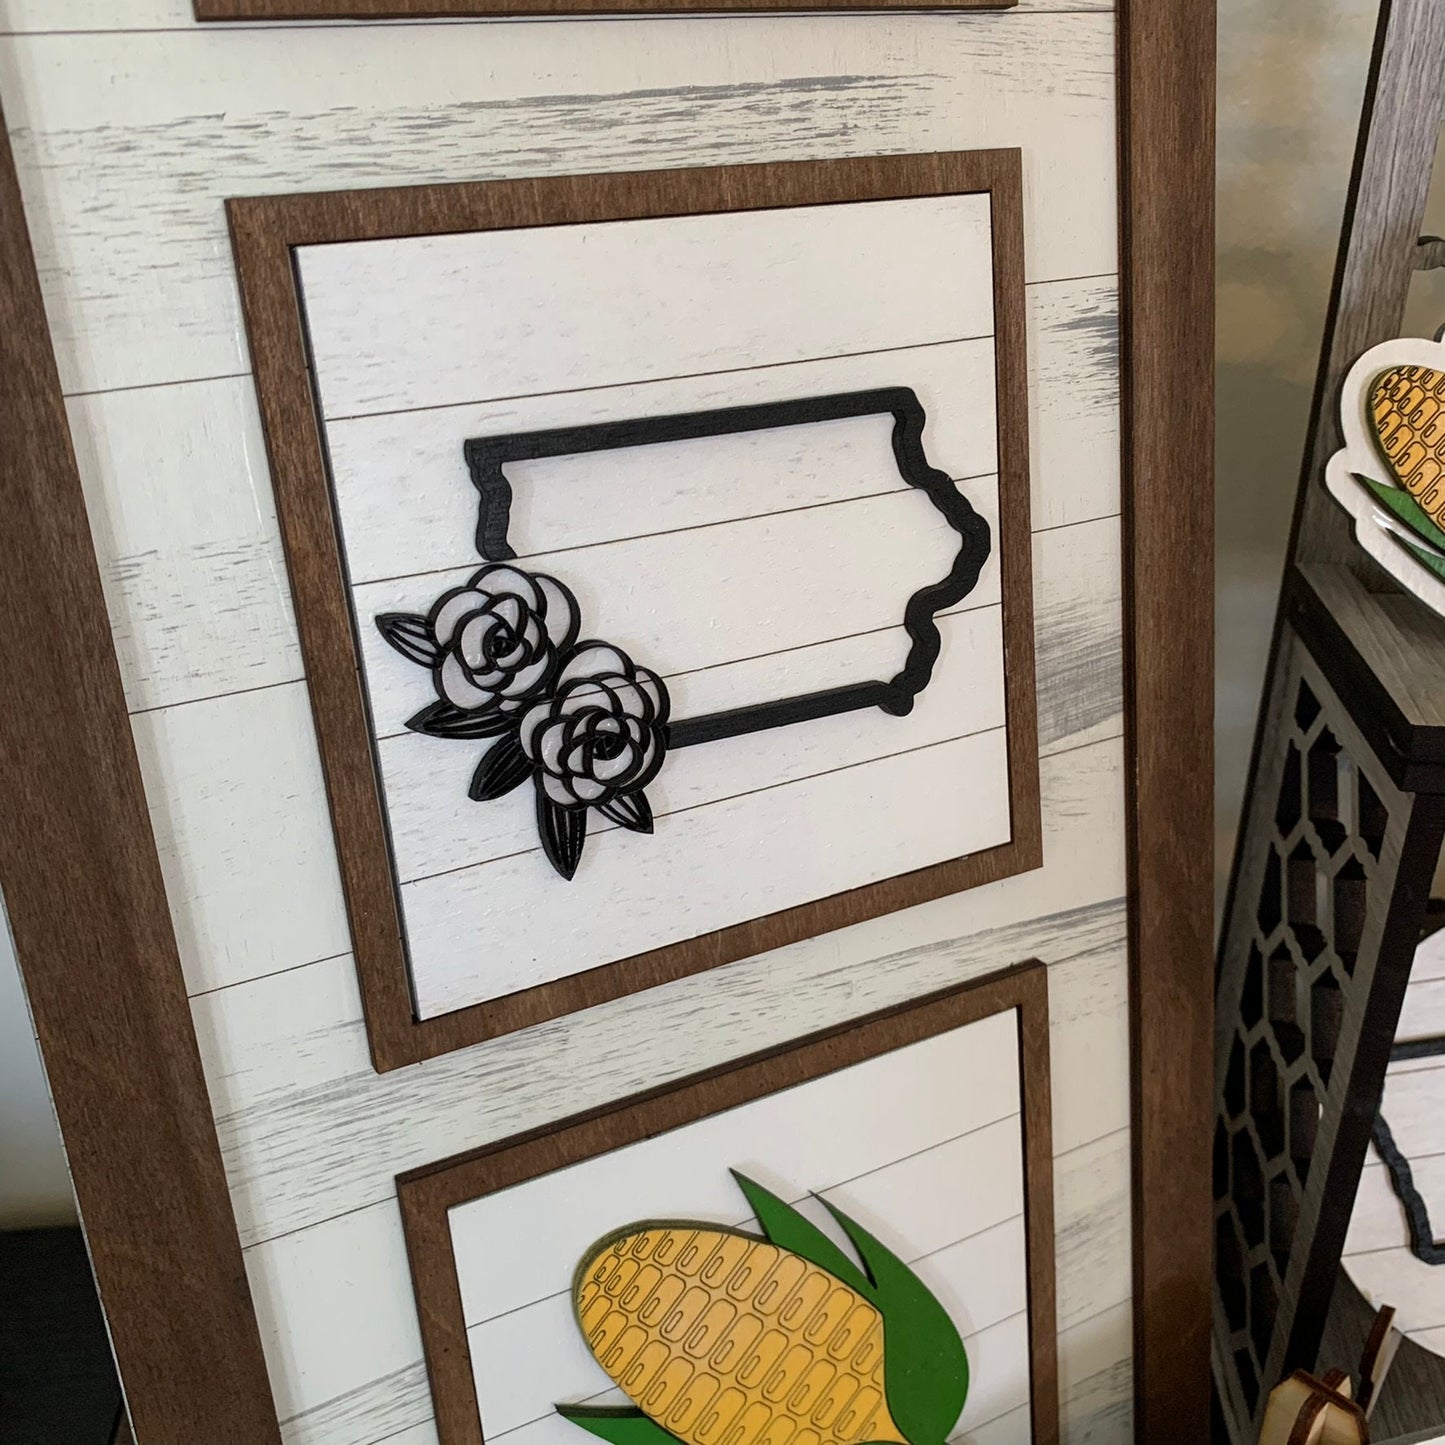 Iowa and Sweet Corn Theme Tiered Tray Decor - Laser Cut Wood Painted